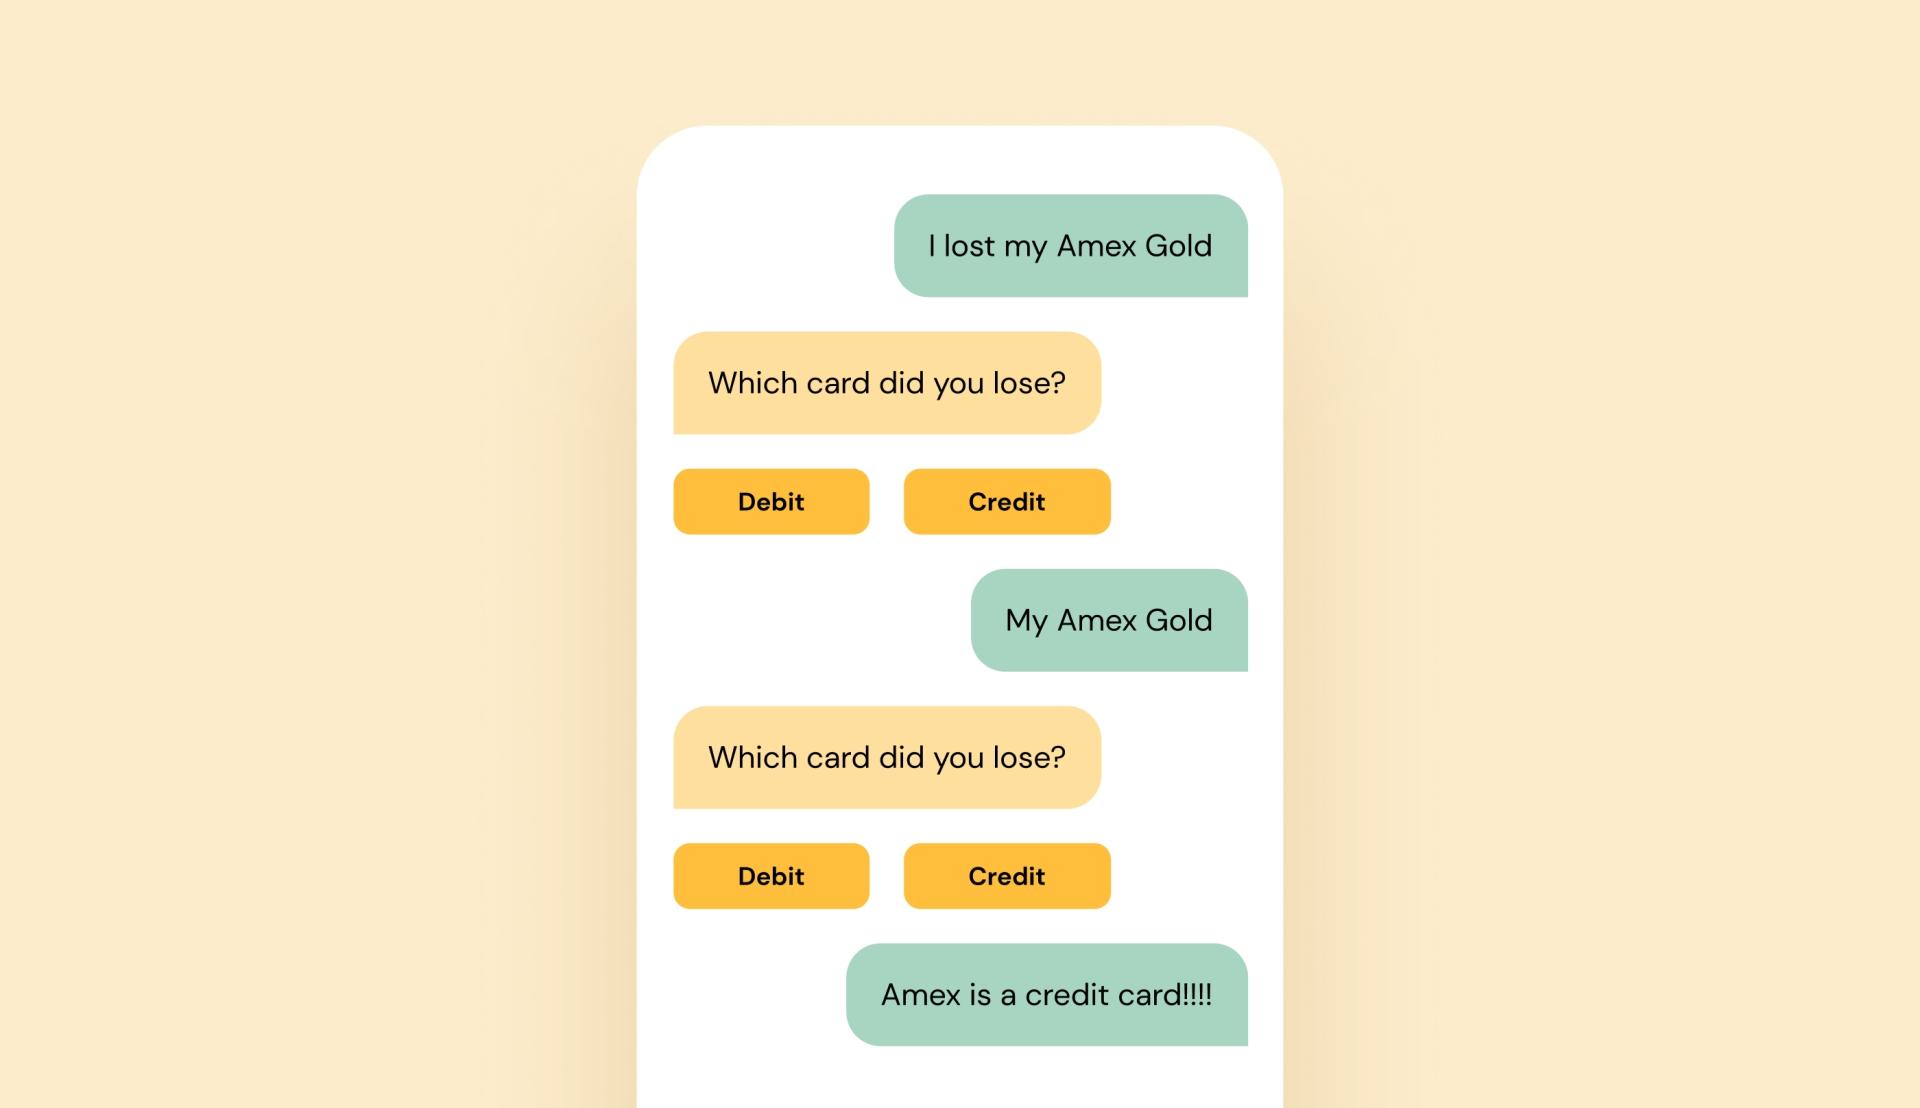 Image showing a phone screen conversation about losing a credit card